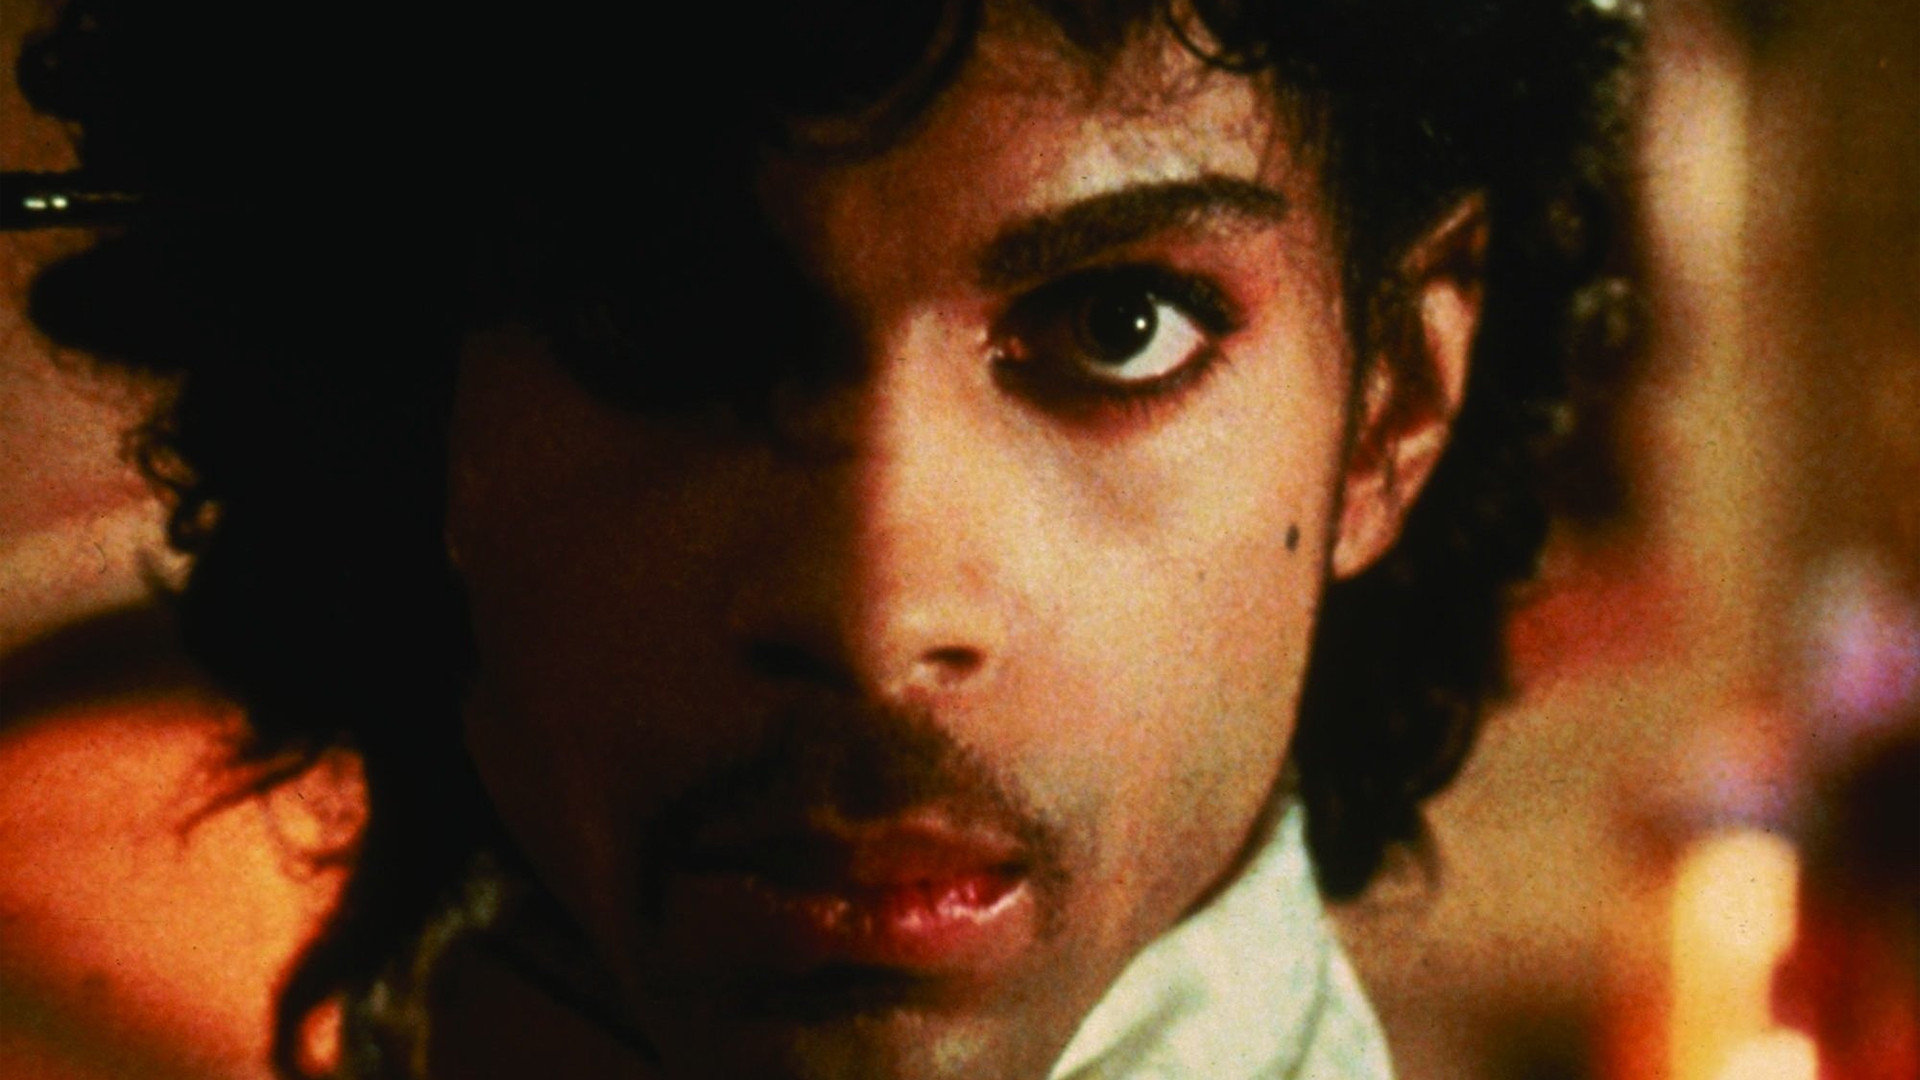 Prince Wallpaper (79+ images)